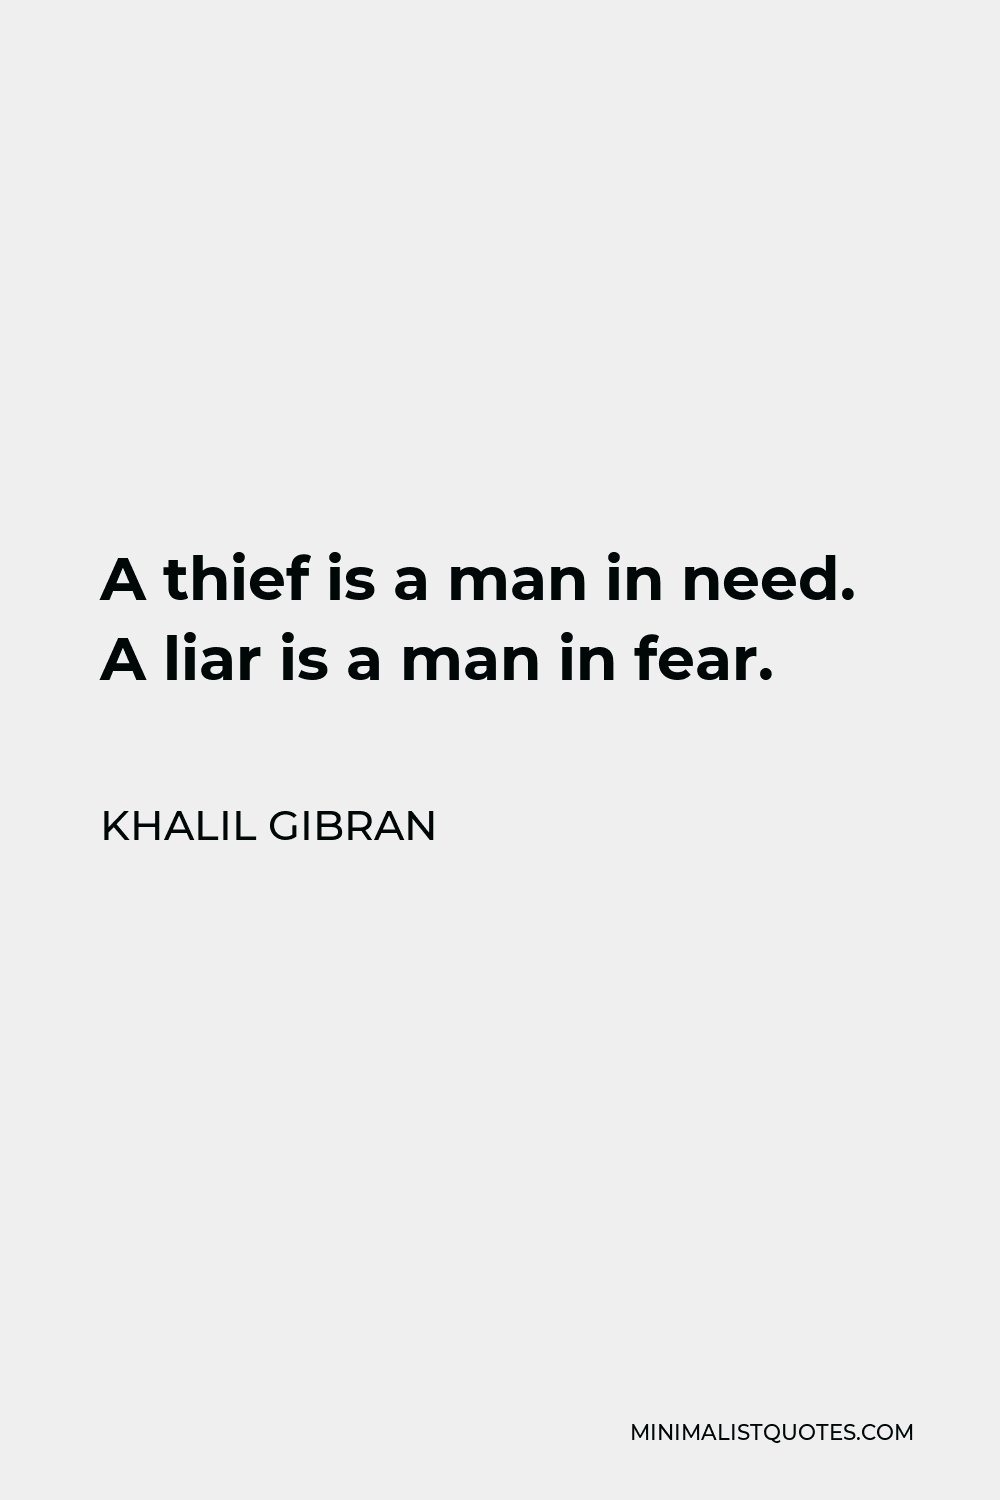 Khalil Gibran Quote - A thief is a man in need. A liar is a man in fear.